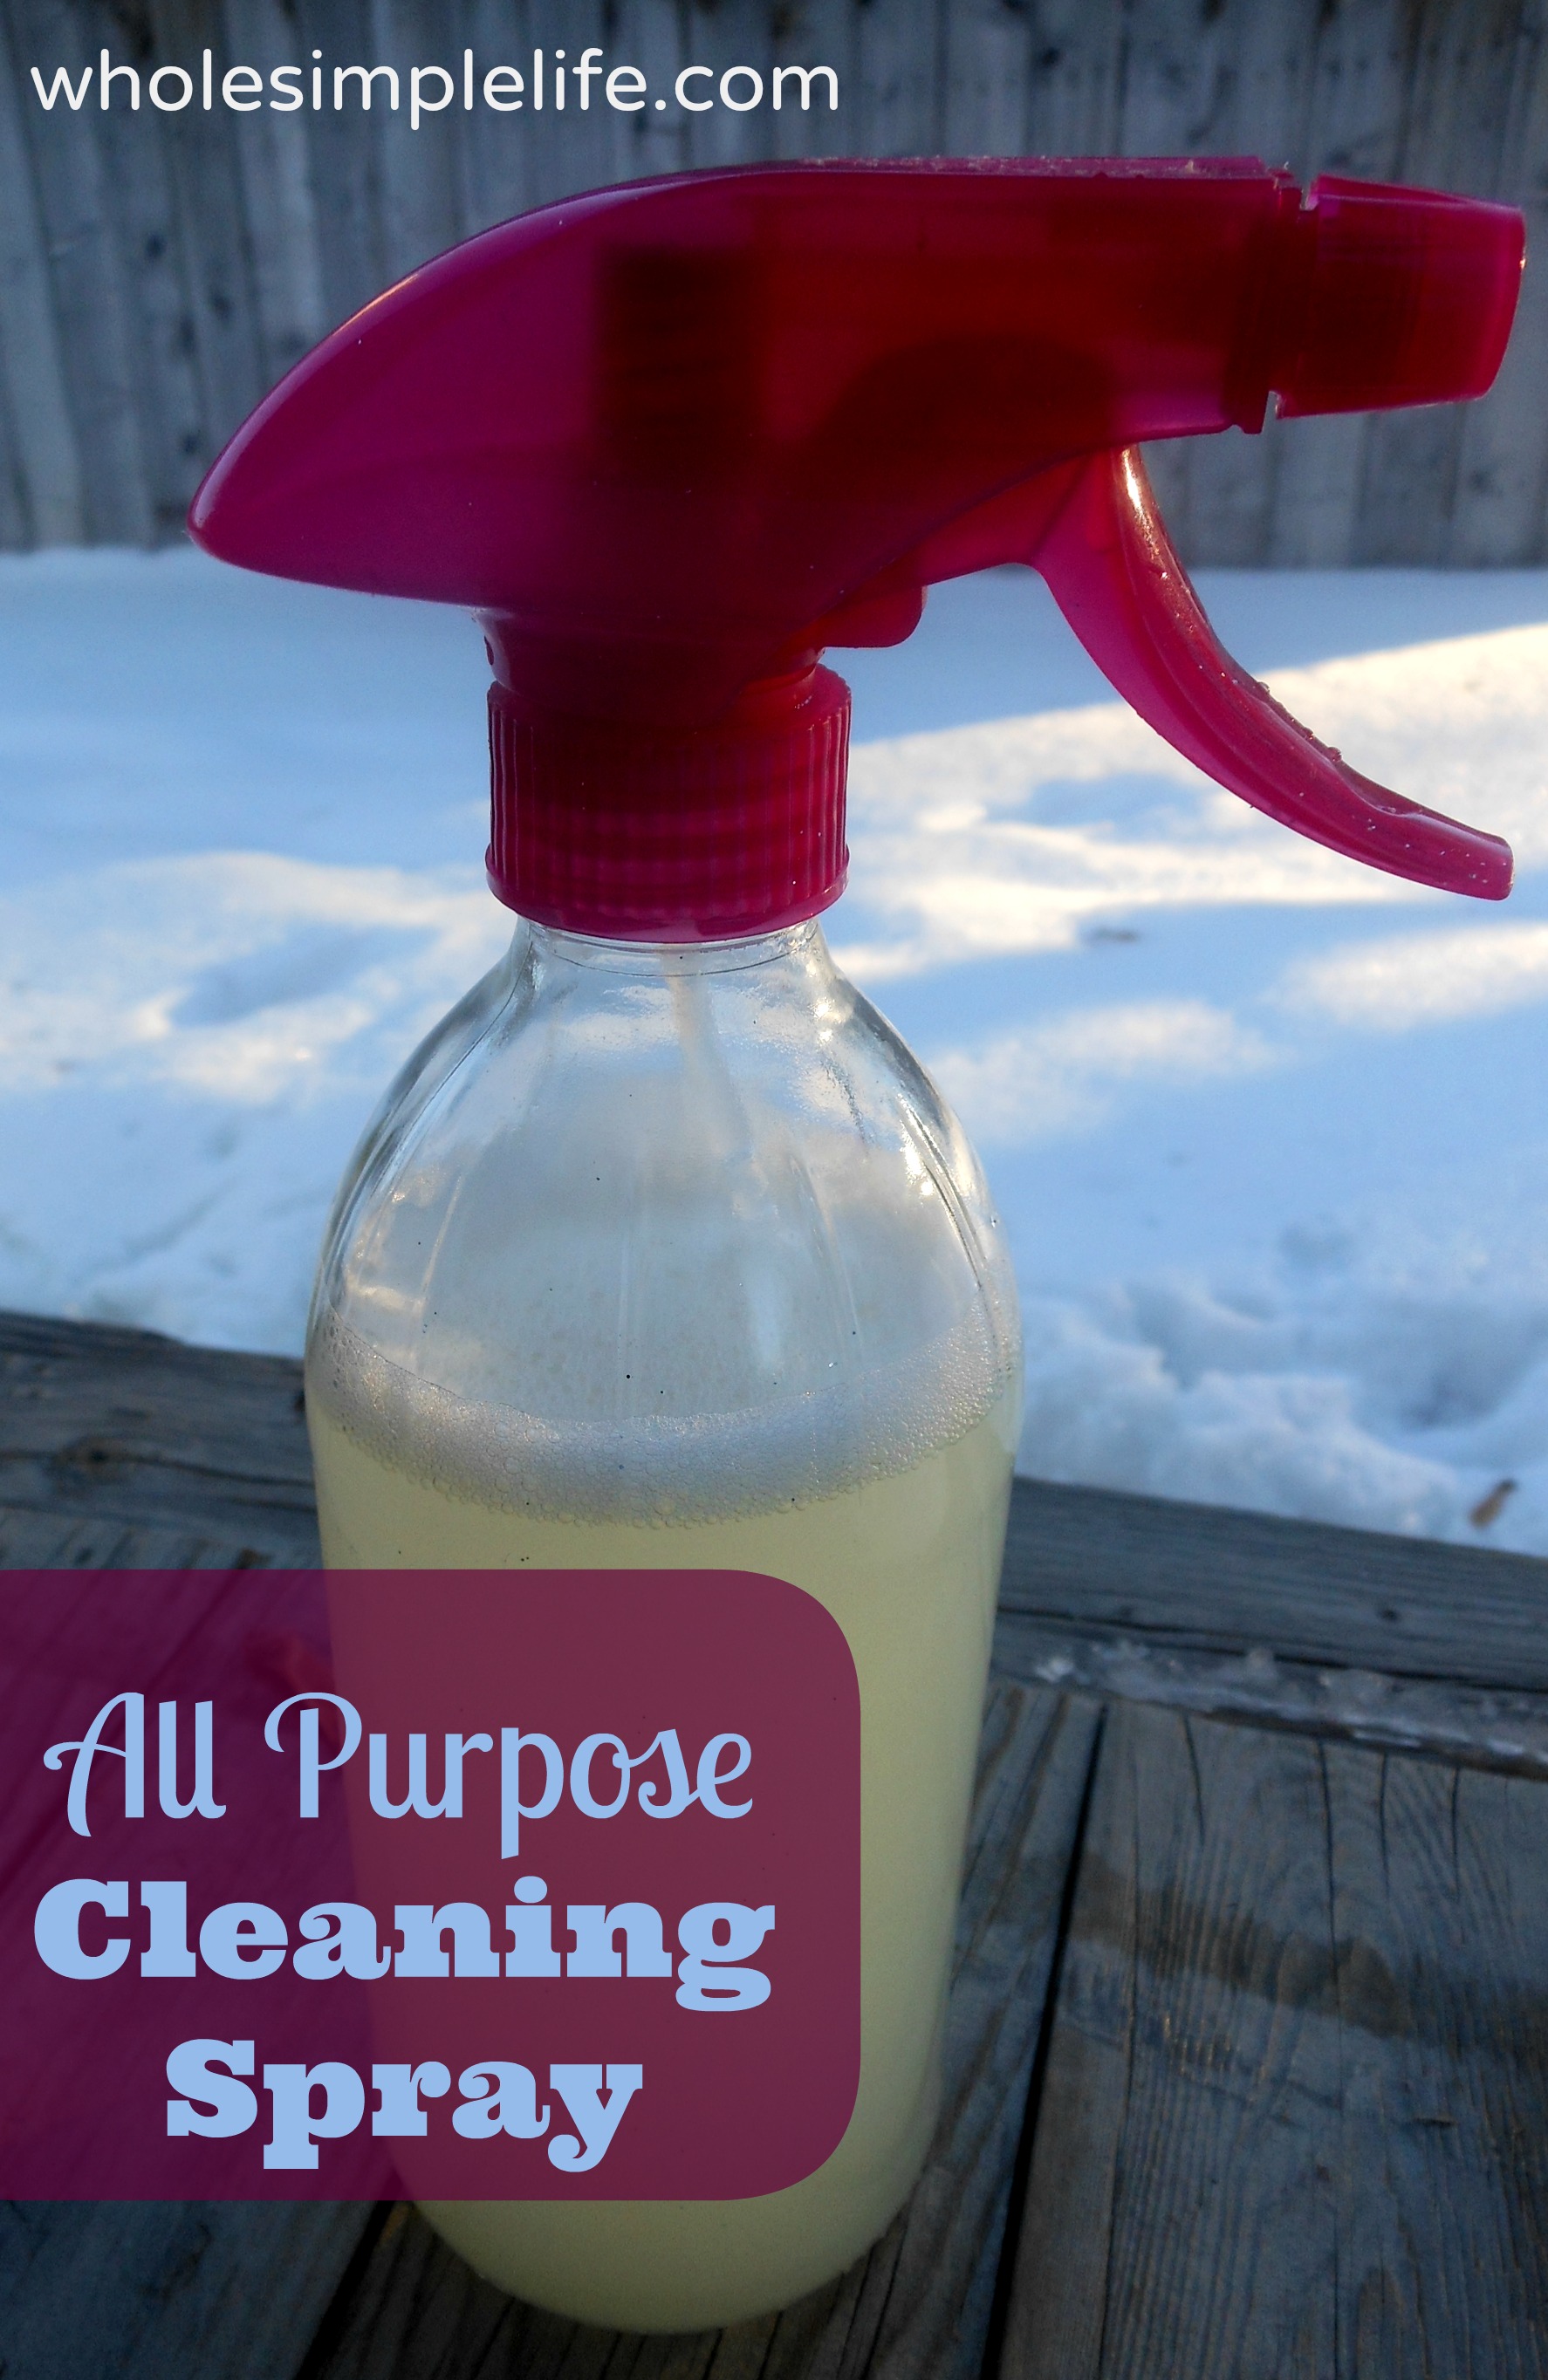 earthview all purpose cleaning spray